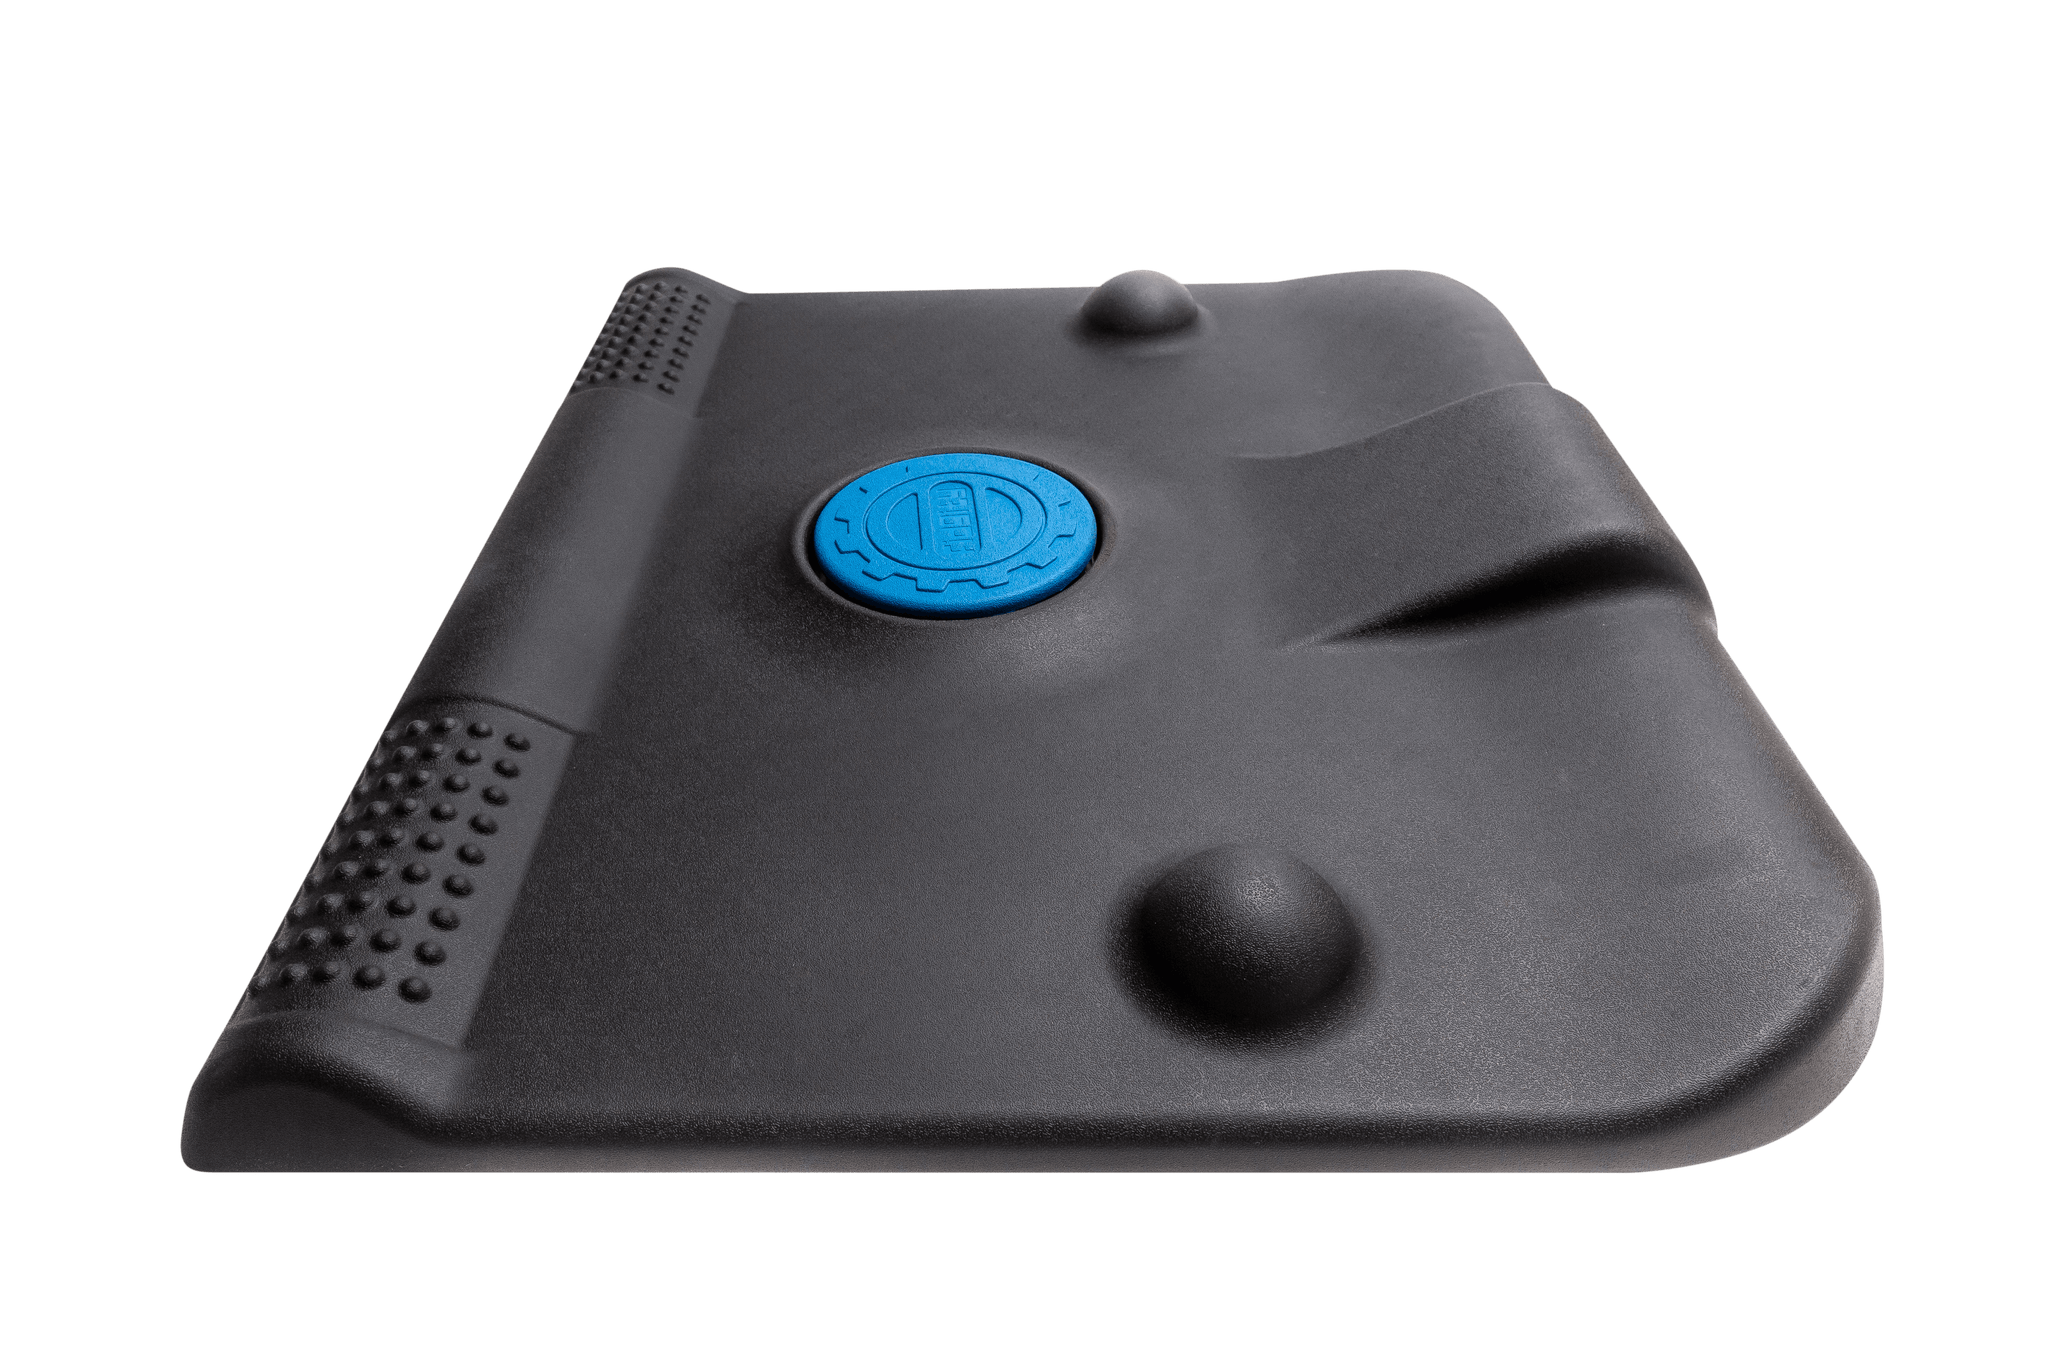 Stand & Spin Anti-Fatigue Mat, Ergonomic Desk Mat with 360 Degree Rotating